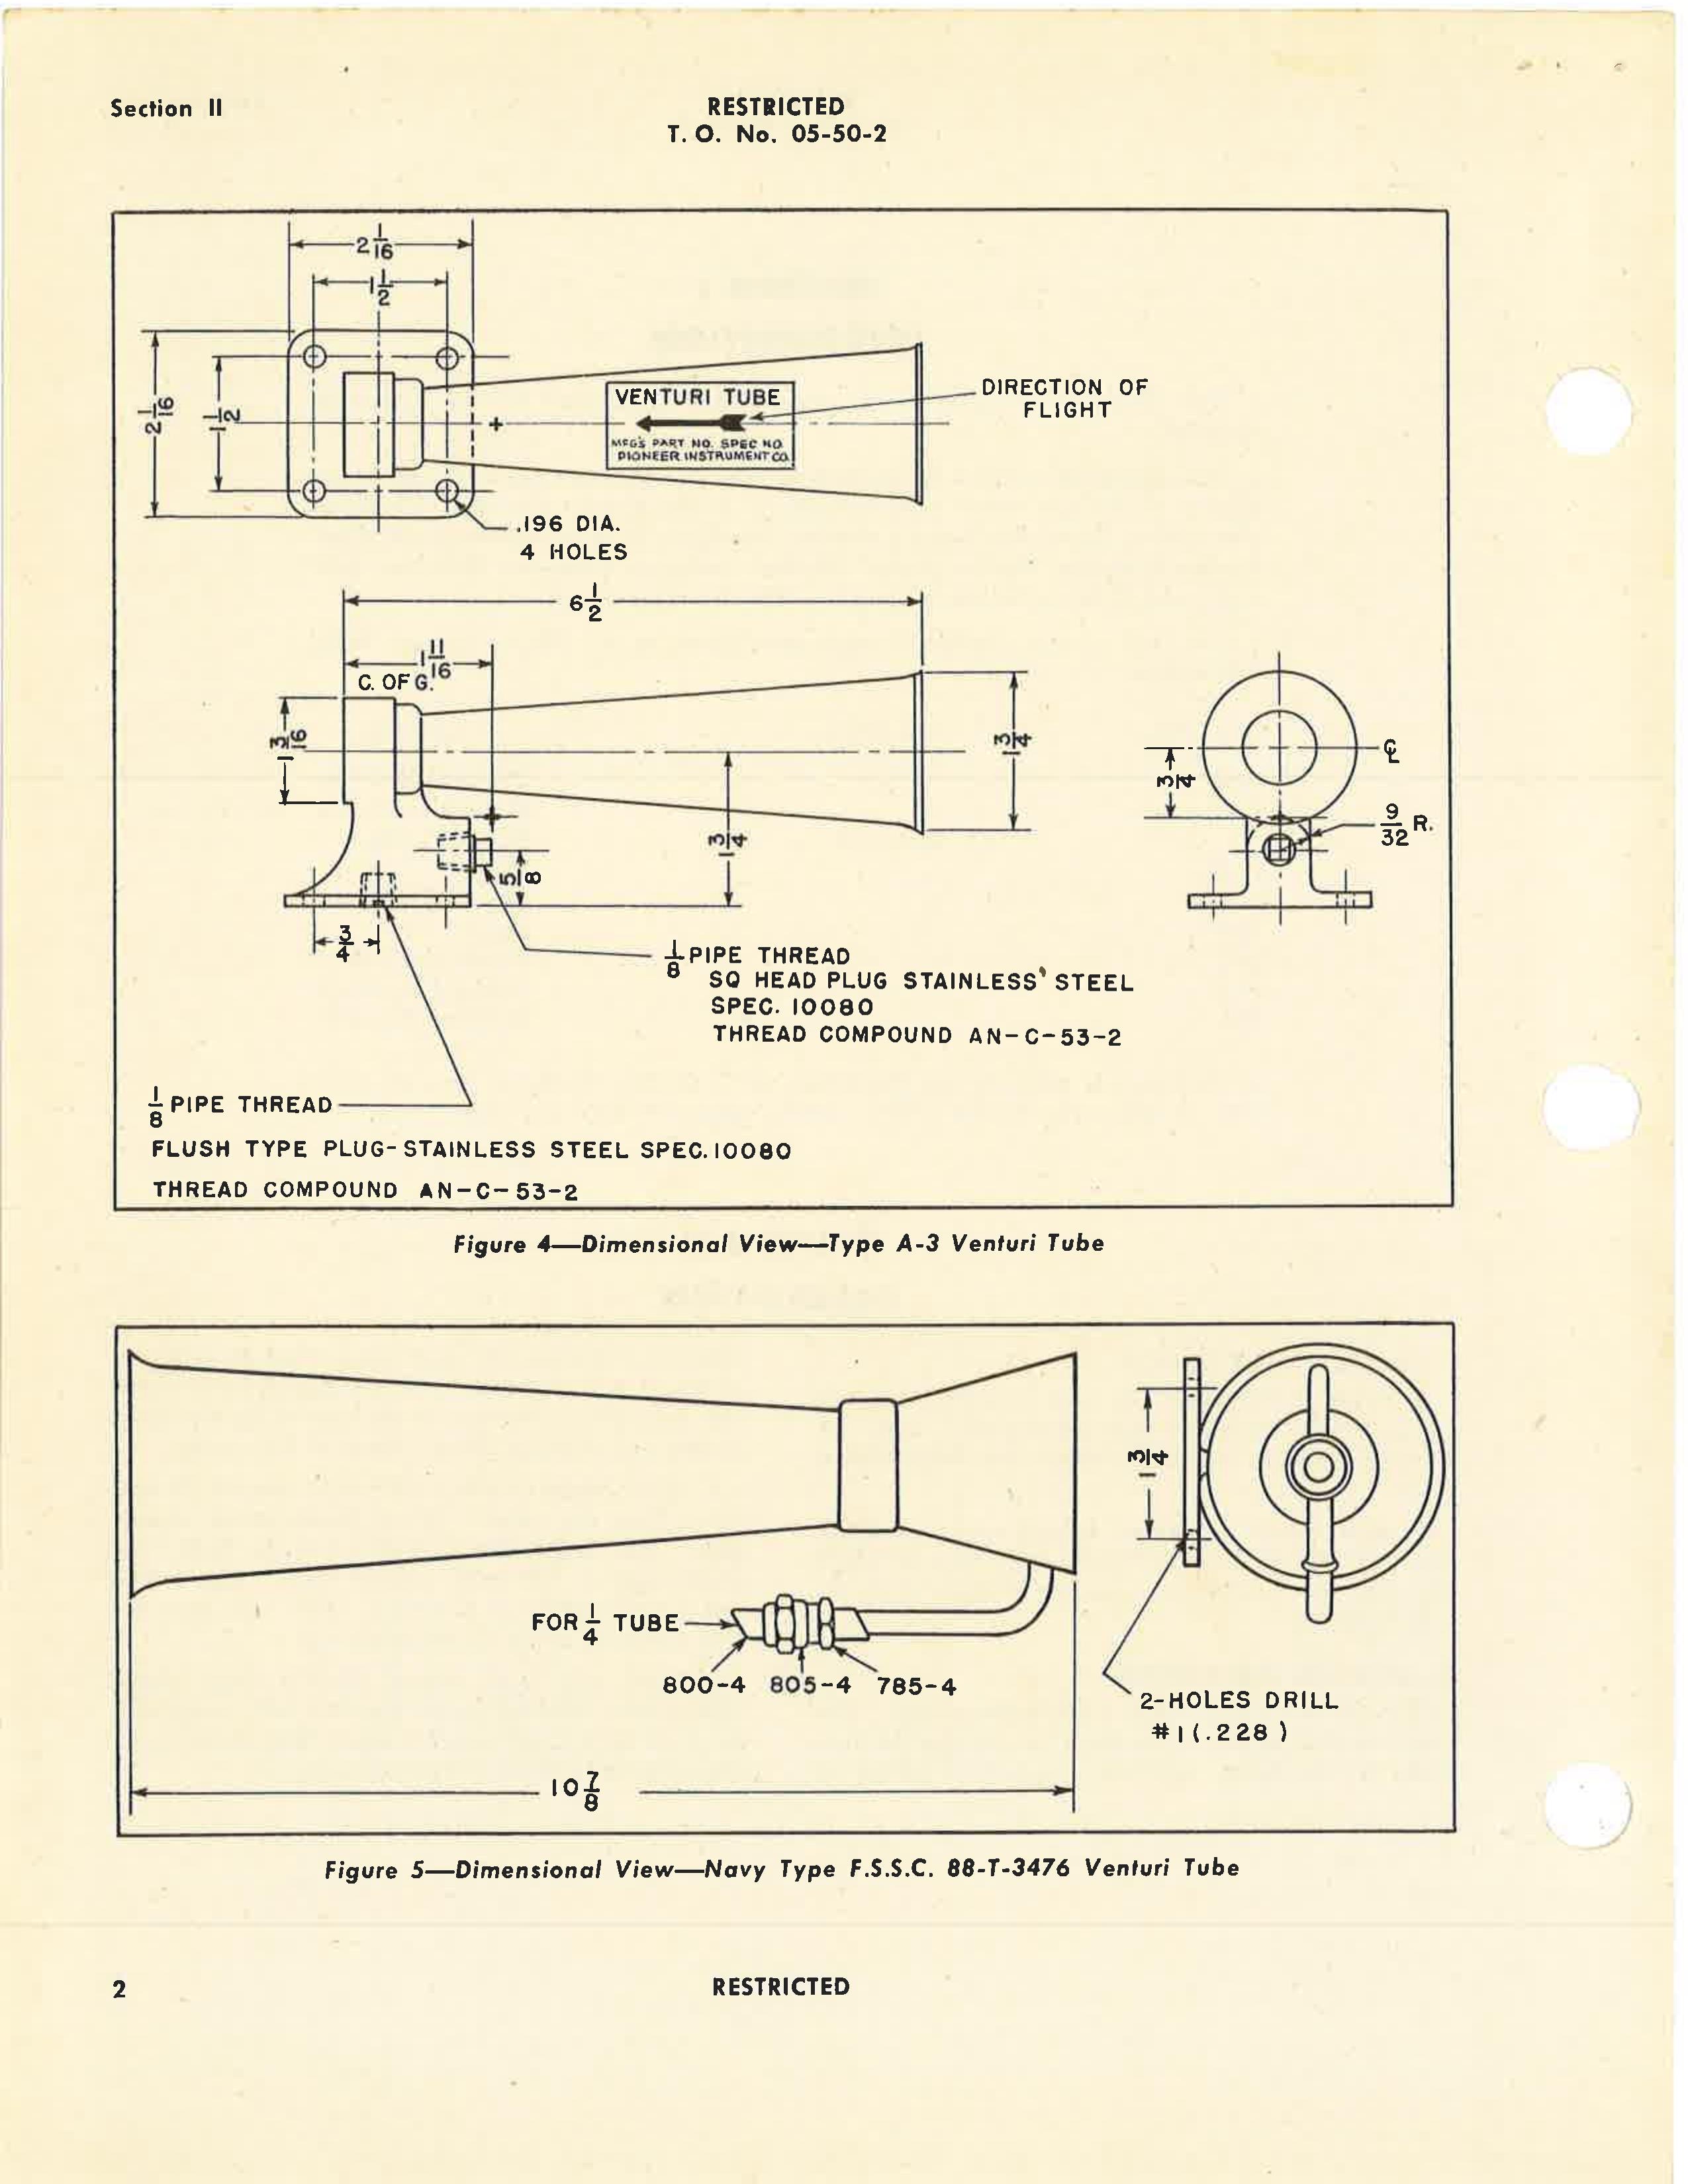 Sample page 8 from AirCorps Library document: Handbook of Instructions with Parts Catalog for Types A-3, A-3A and B-4, Power Veturi Tubes